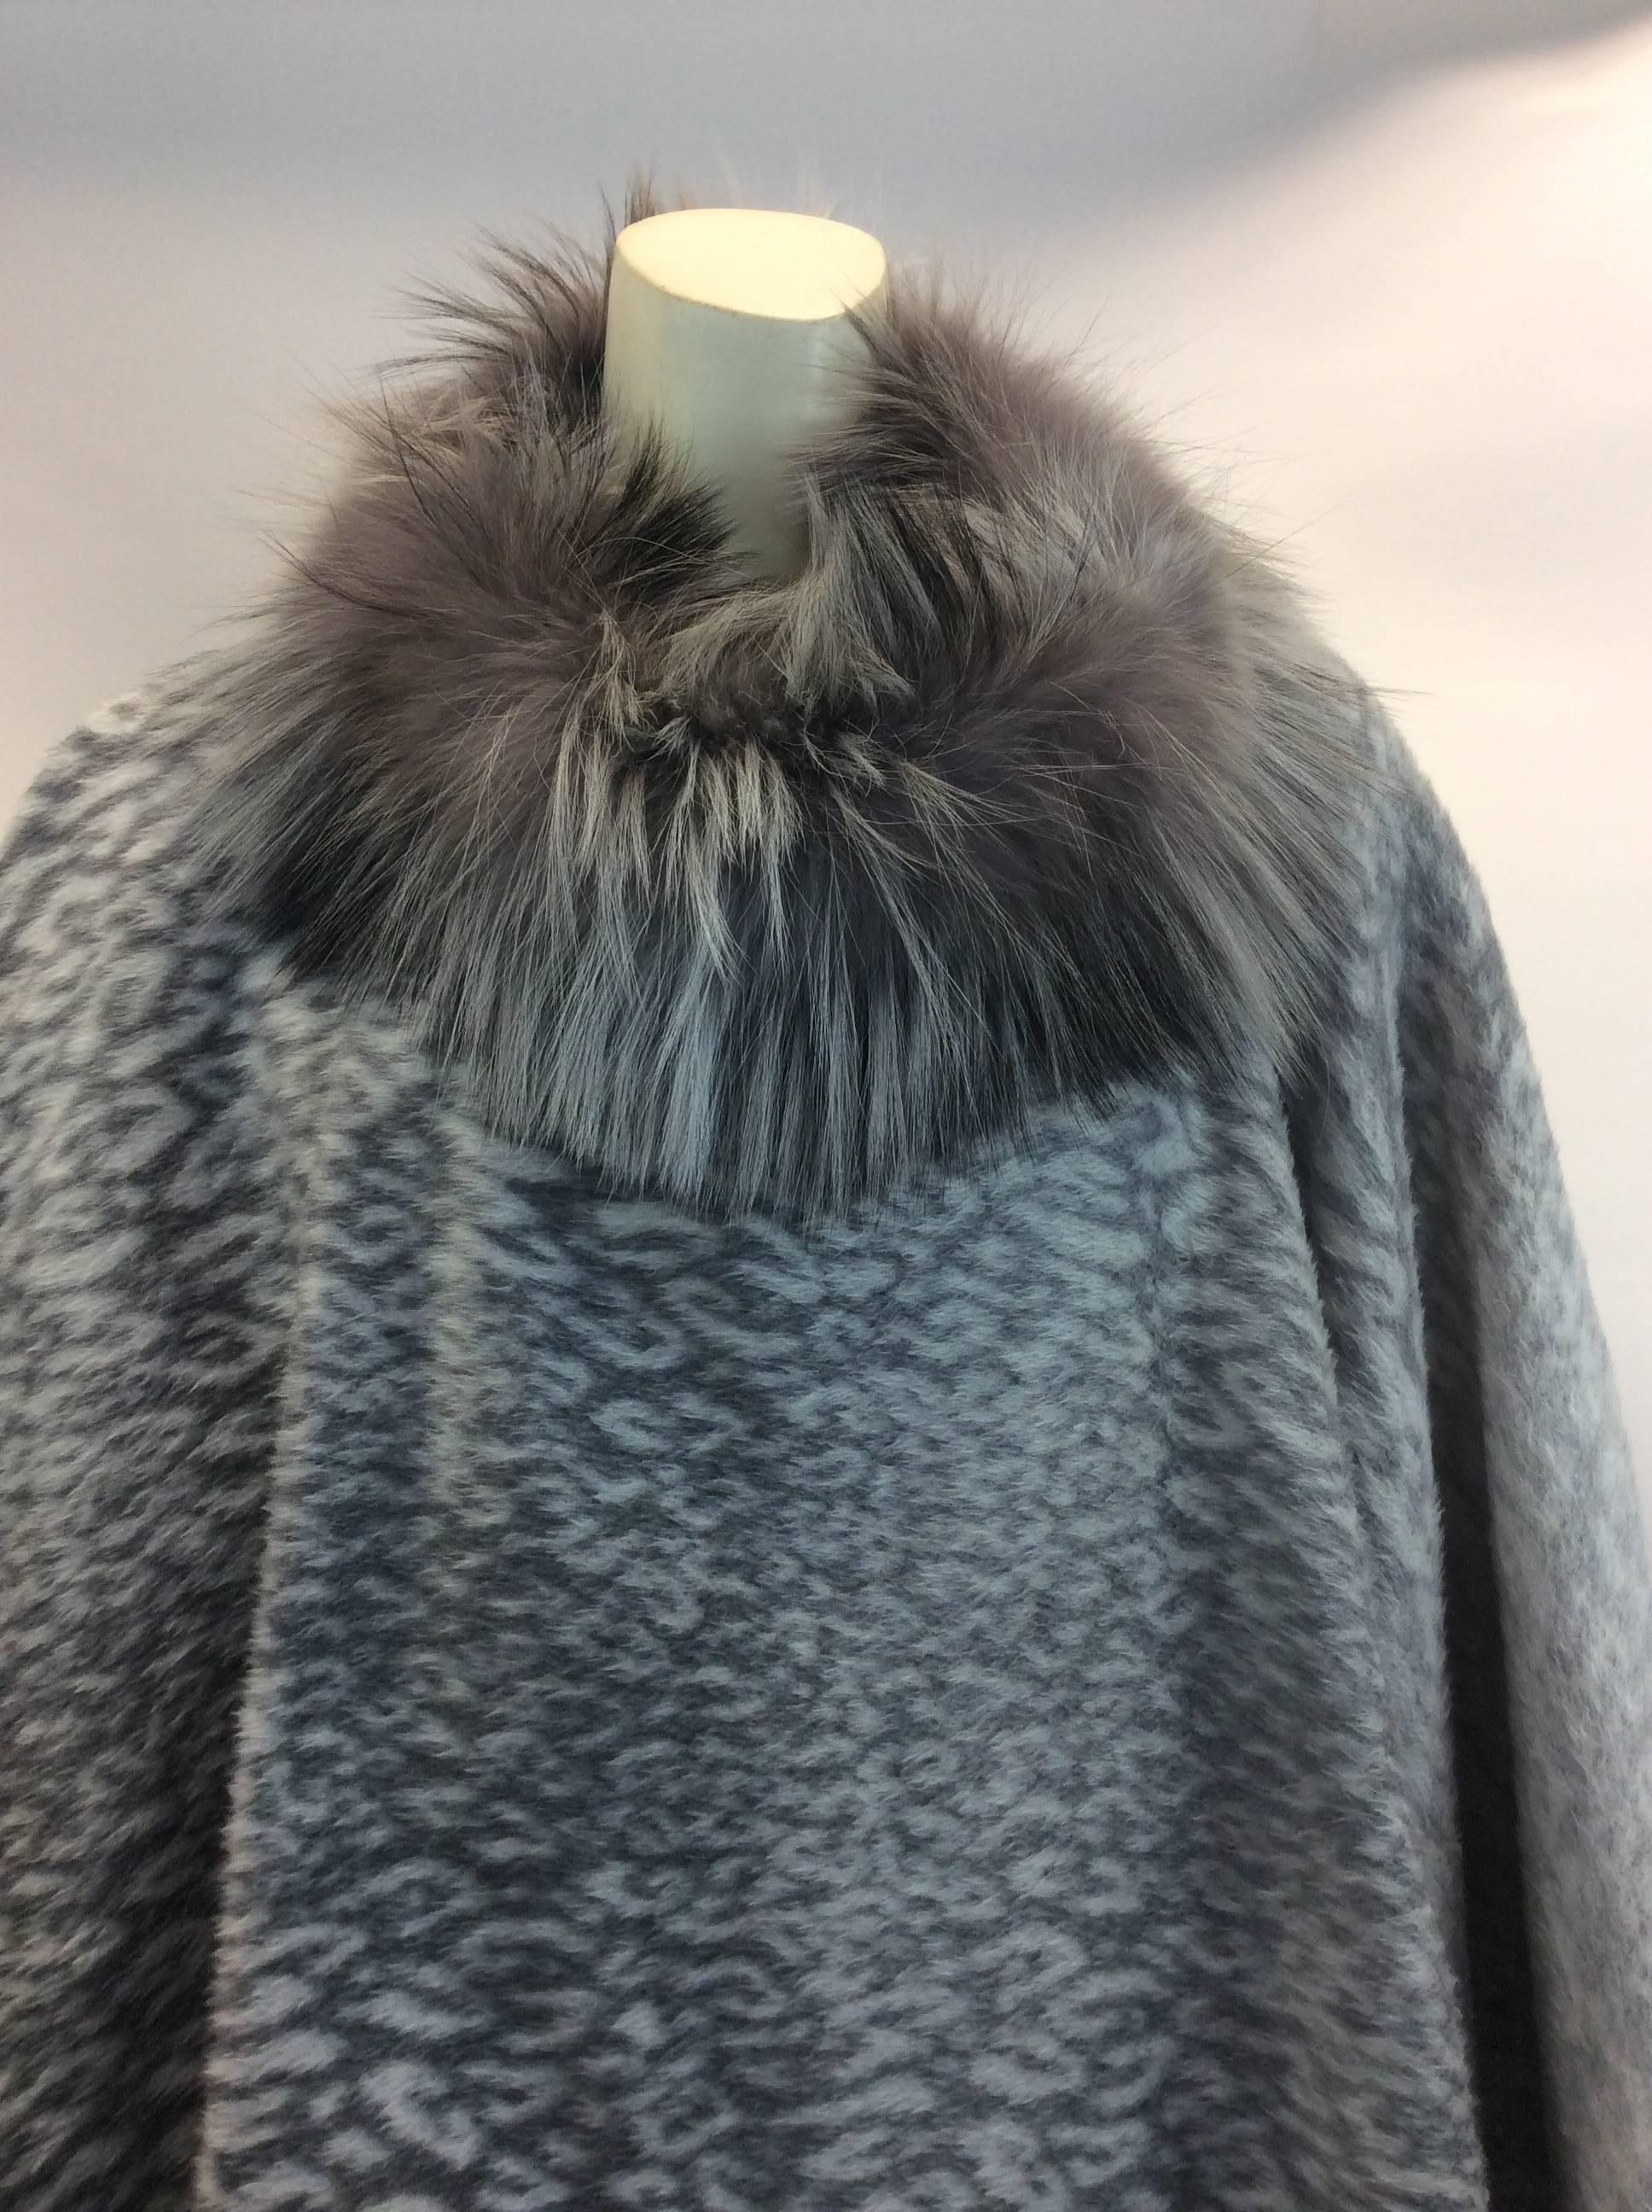 Mazzi Gray Leopard Fox Trimmed Cape
$399
Made in Italy 
41% acrylic, 21% polyester, 18% viscose 16% wool, 4% nylon
Neck portion is Fox
